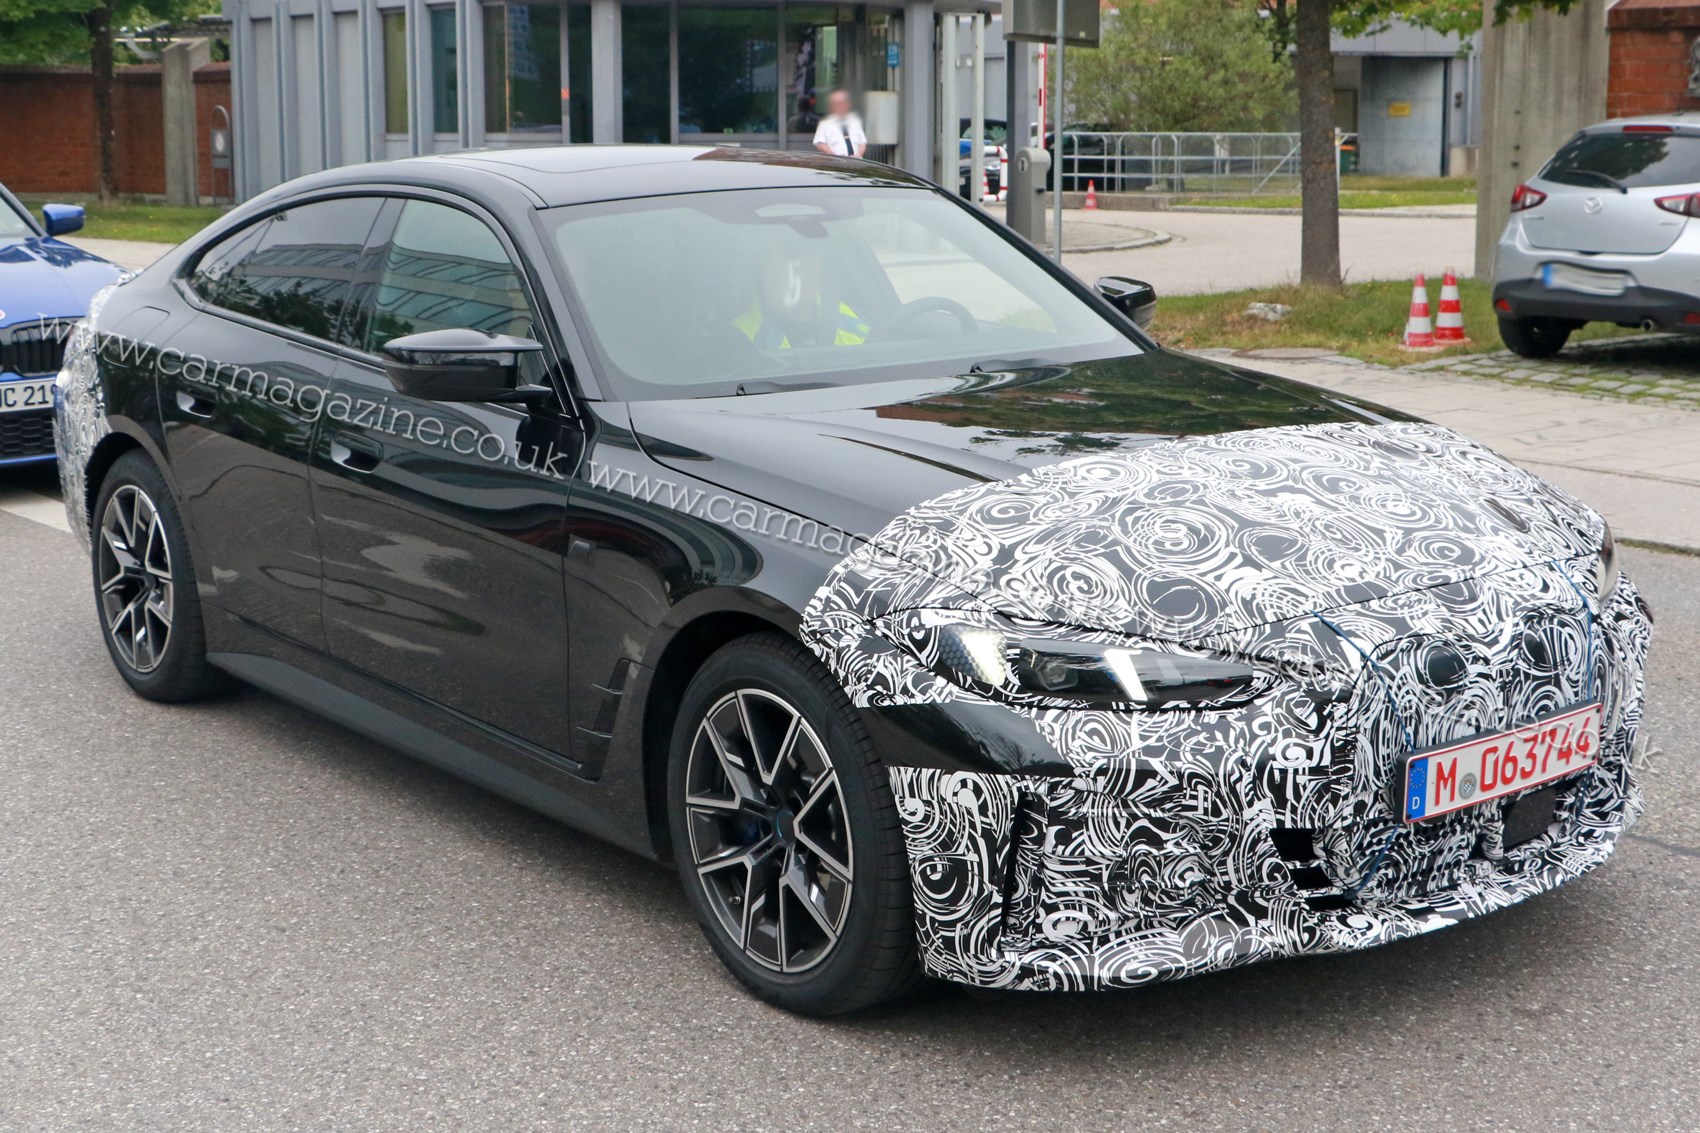 BMW i4 electric car facelift spotted